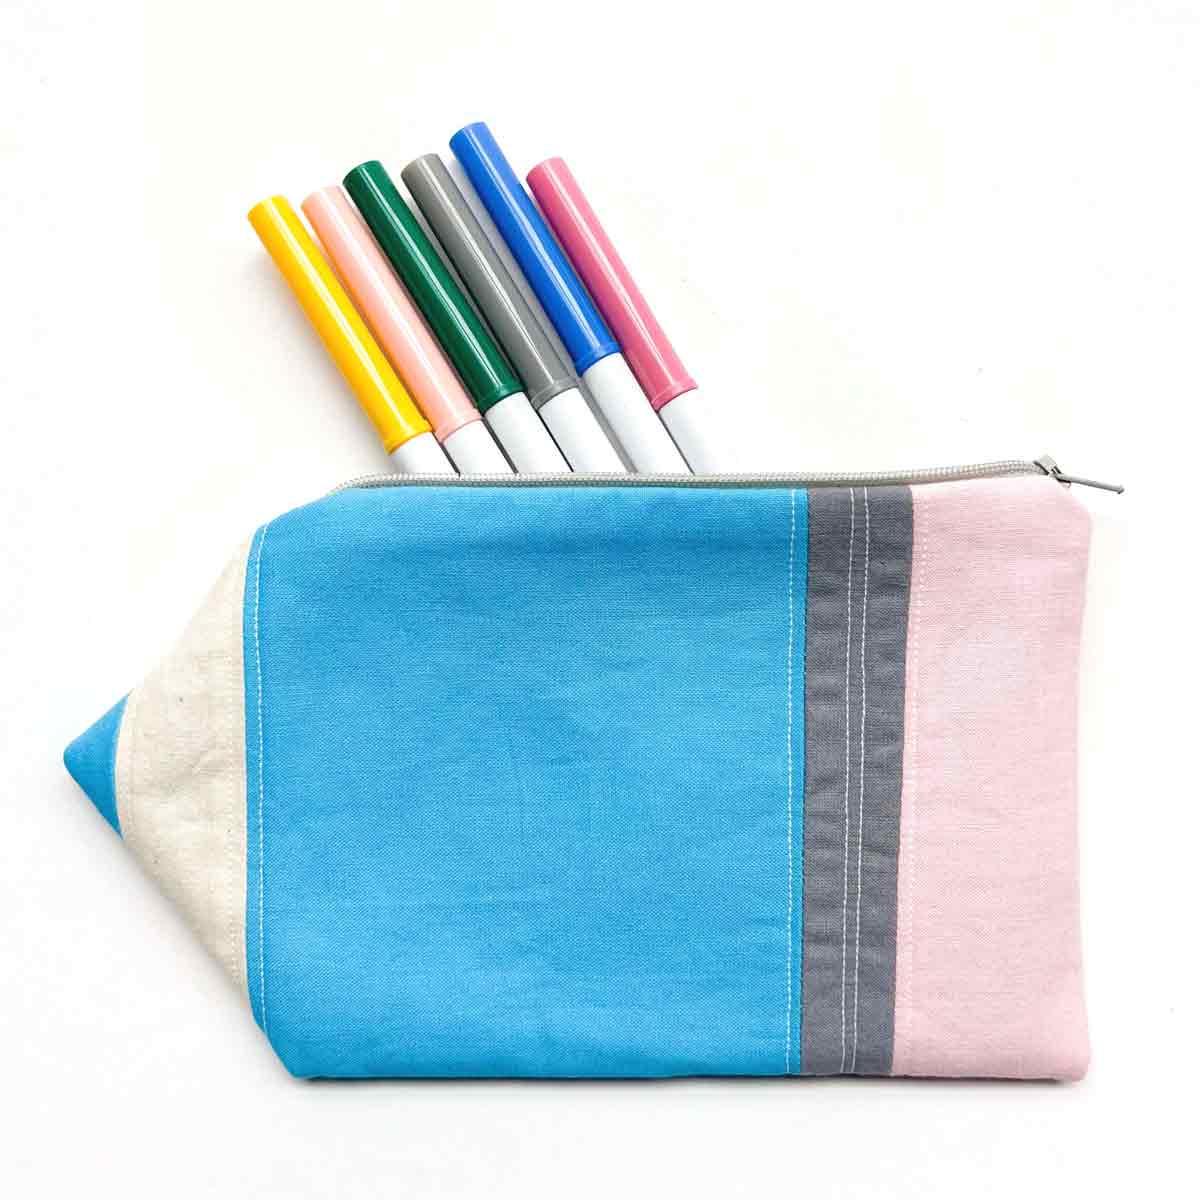 DIY pencil pouch featured image